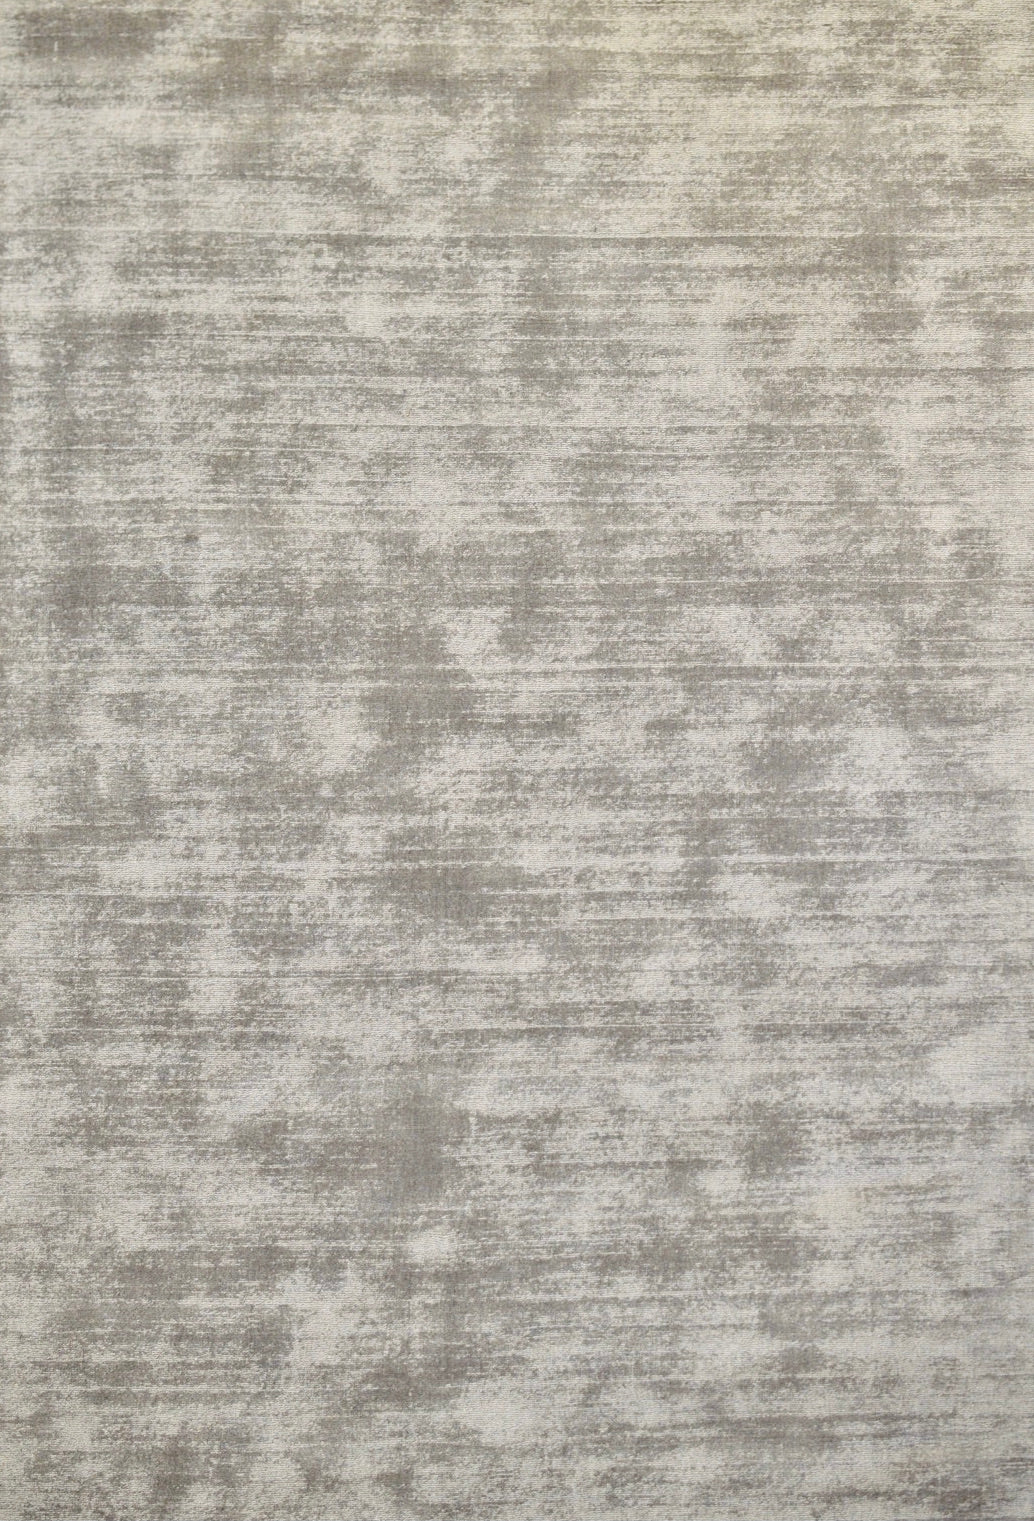  handmade area rug refined carpet rugs fountain valley california orange county rug store area rug carpet flooring store wool bamboo rugs traditional restoration hardware pottery barn rugs stratus collection solid color grey gray rugs hand loomed